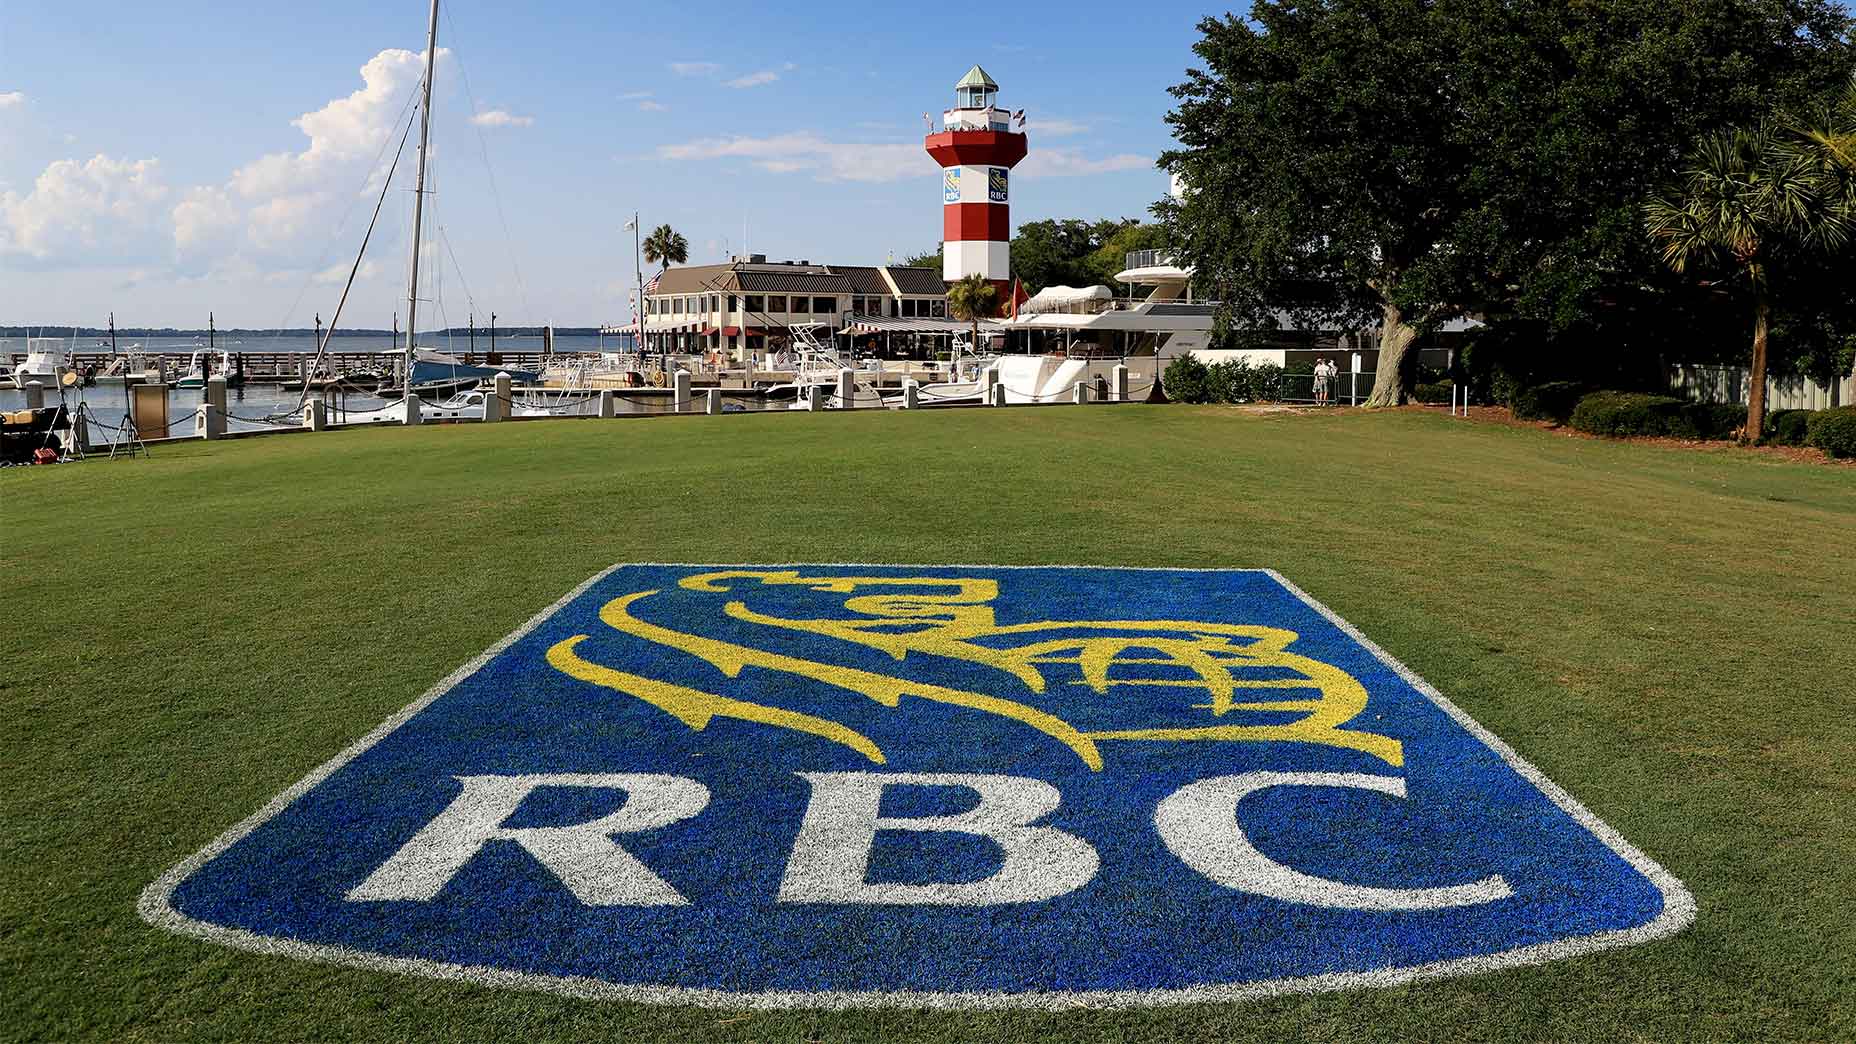 2020 RBC Heritage Classic purse Payout breakdown and winner’s share